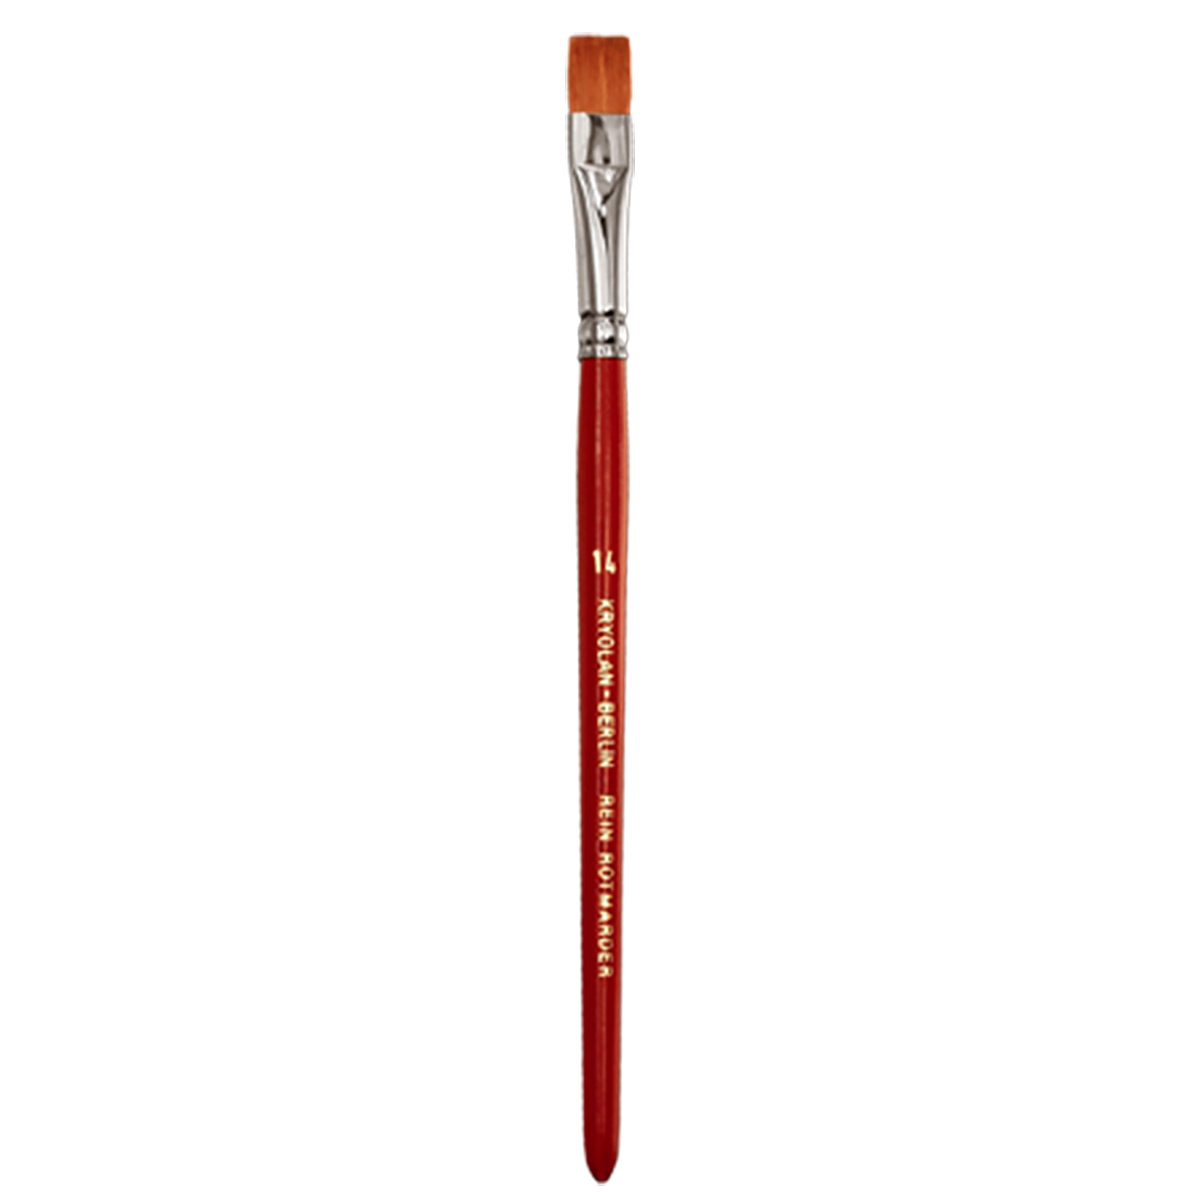 EXCELLENCE FLAT BRUSH 14